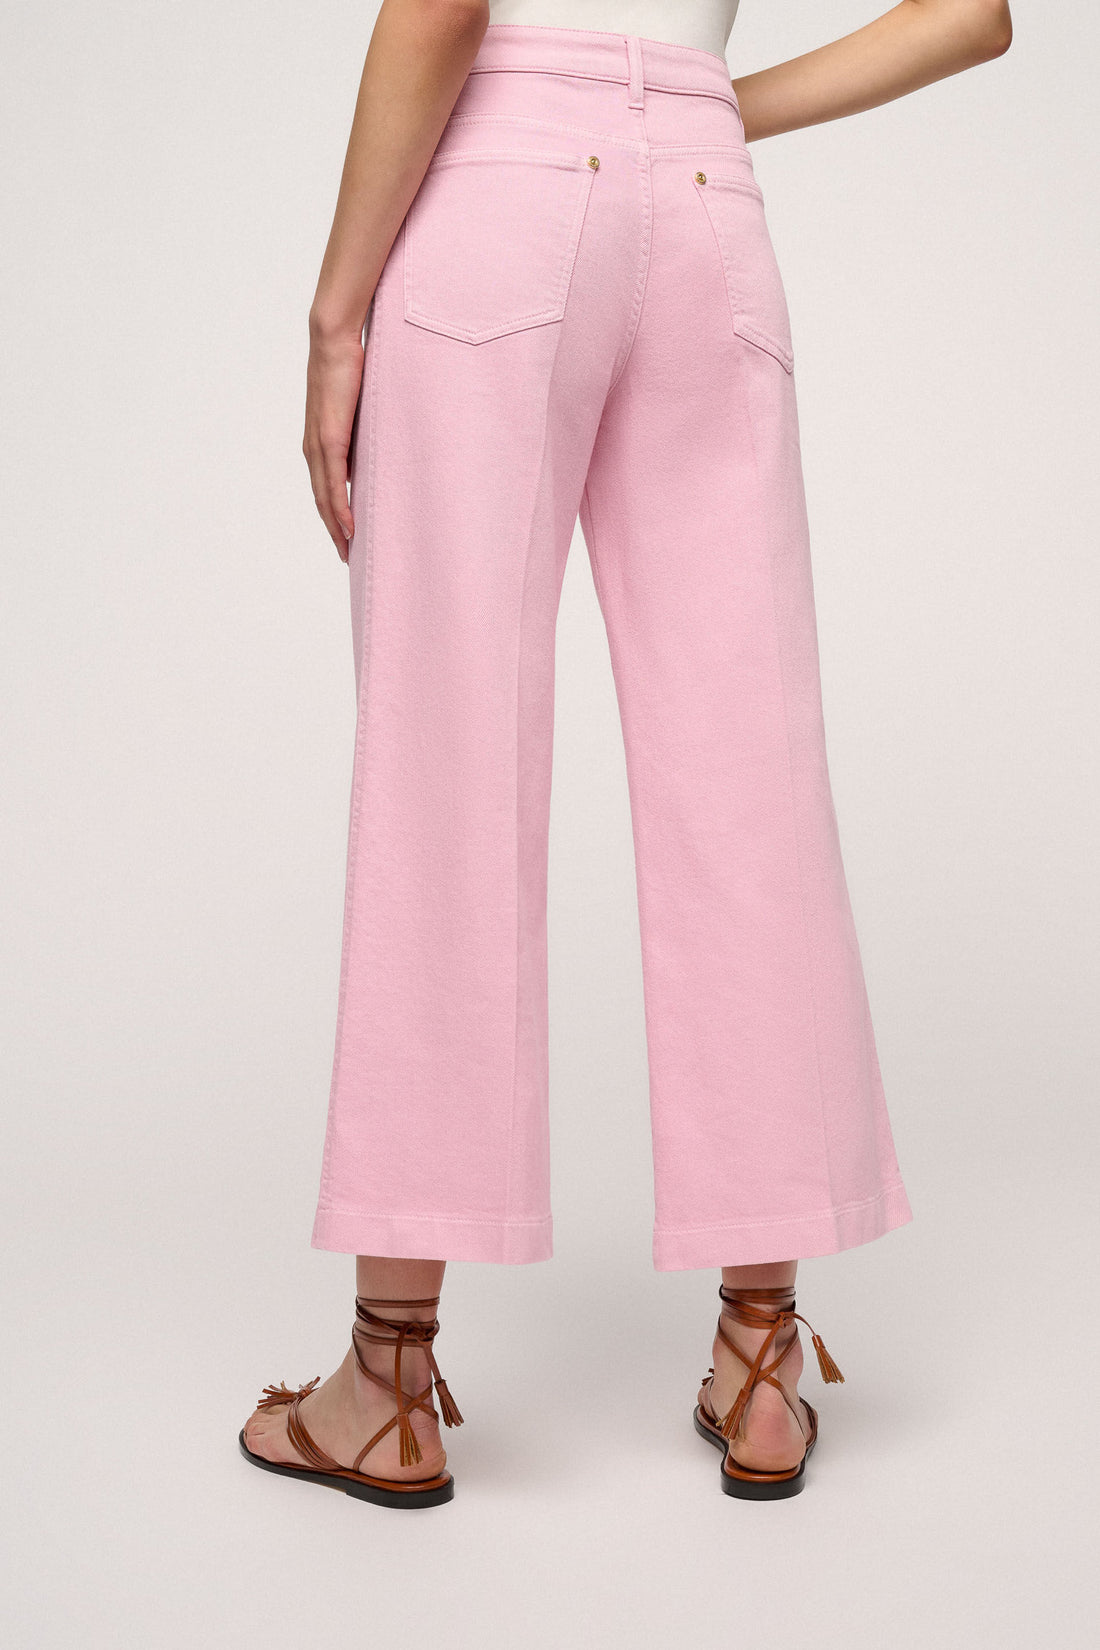 Baby Pink Palazzo Jeans_Acronimo_0304_02